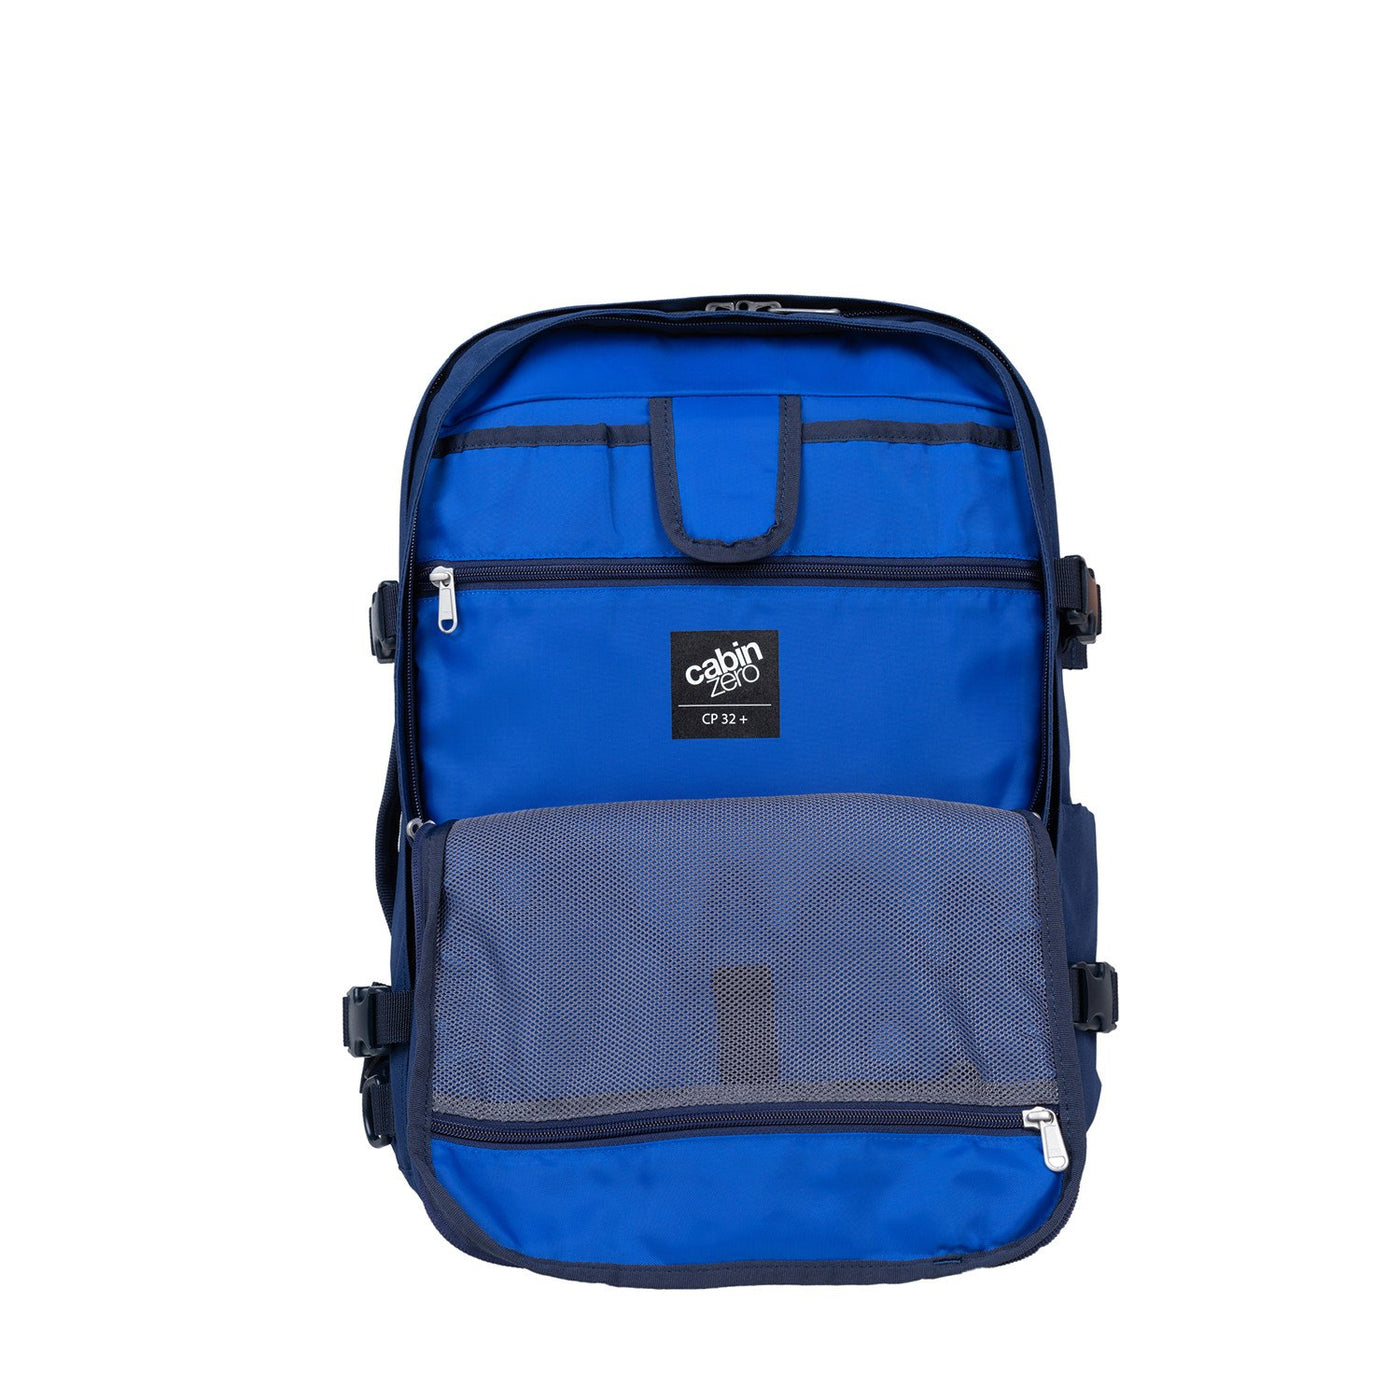  cabin zero cz171205 backpack navy : Clothing, Shoes